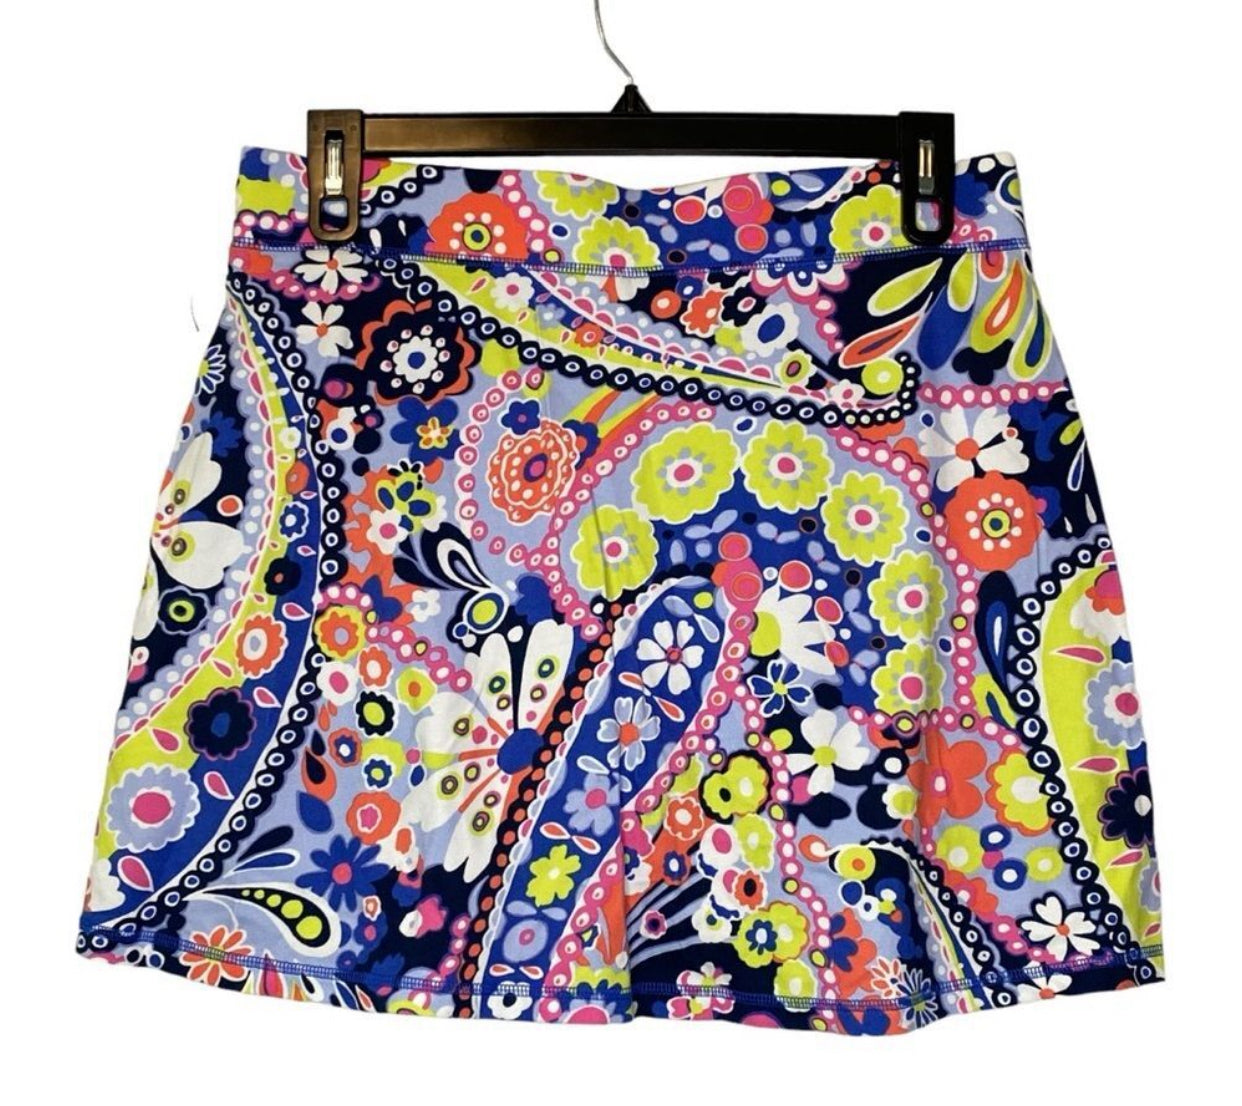 T by Talbots Bright Floral Skort UPF30 Golf Athletic Tennis - Size Large Petite